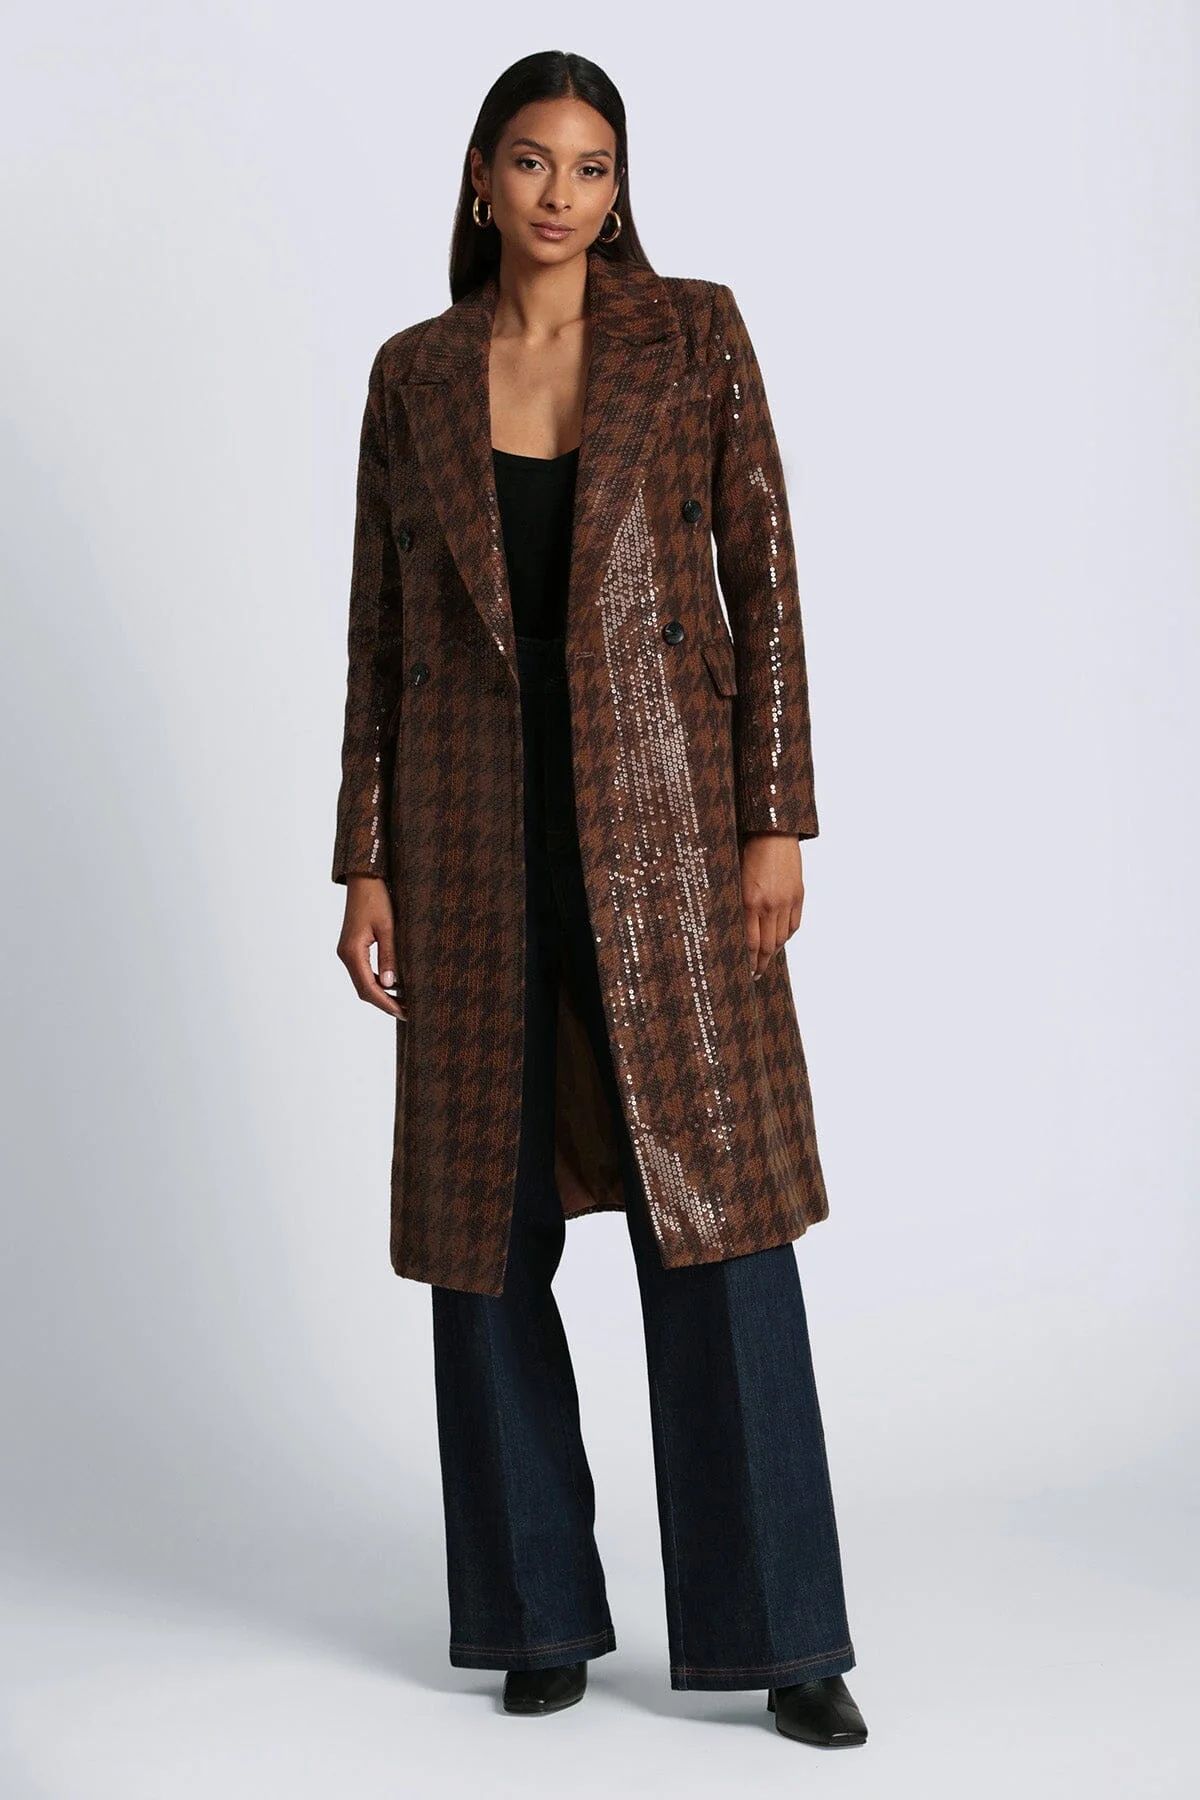 Sequin Houndstooth Tailored Coat | Avec Les Files